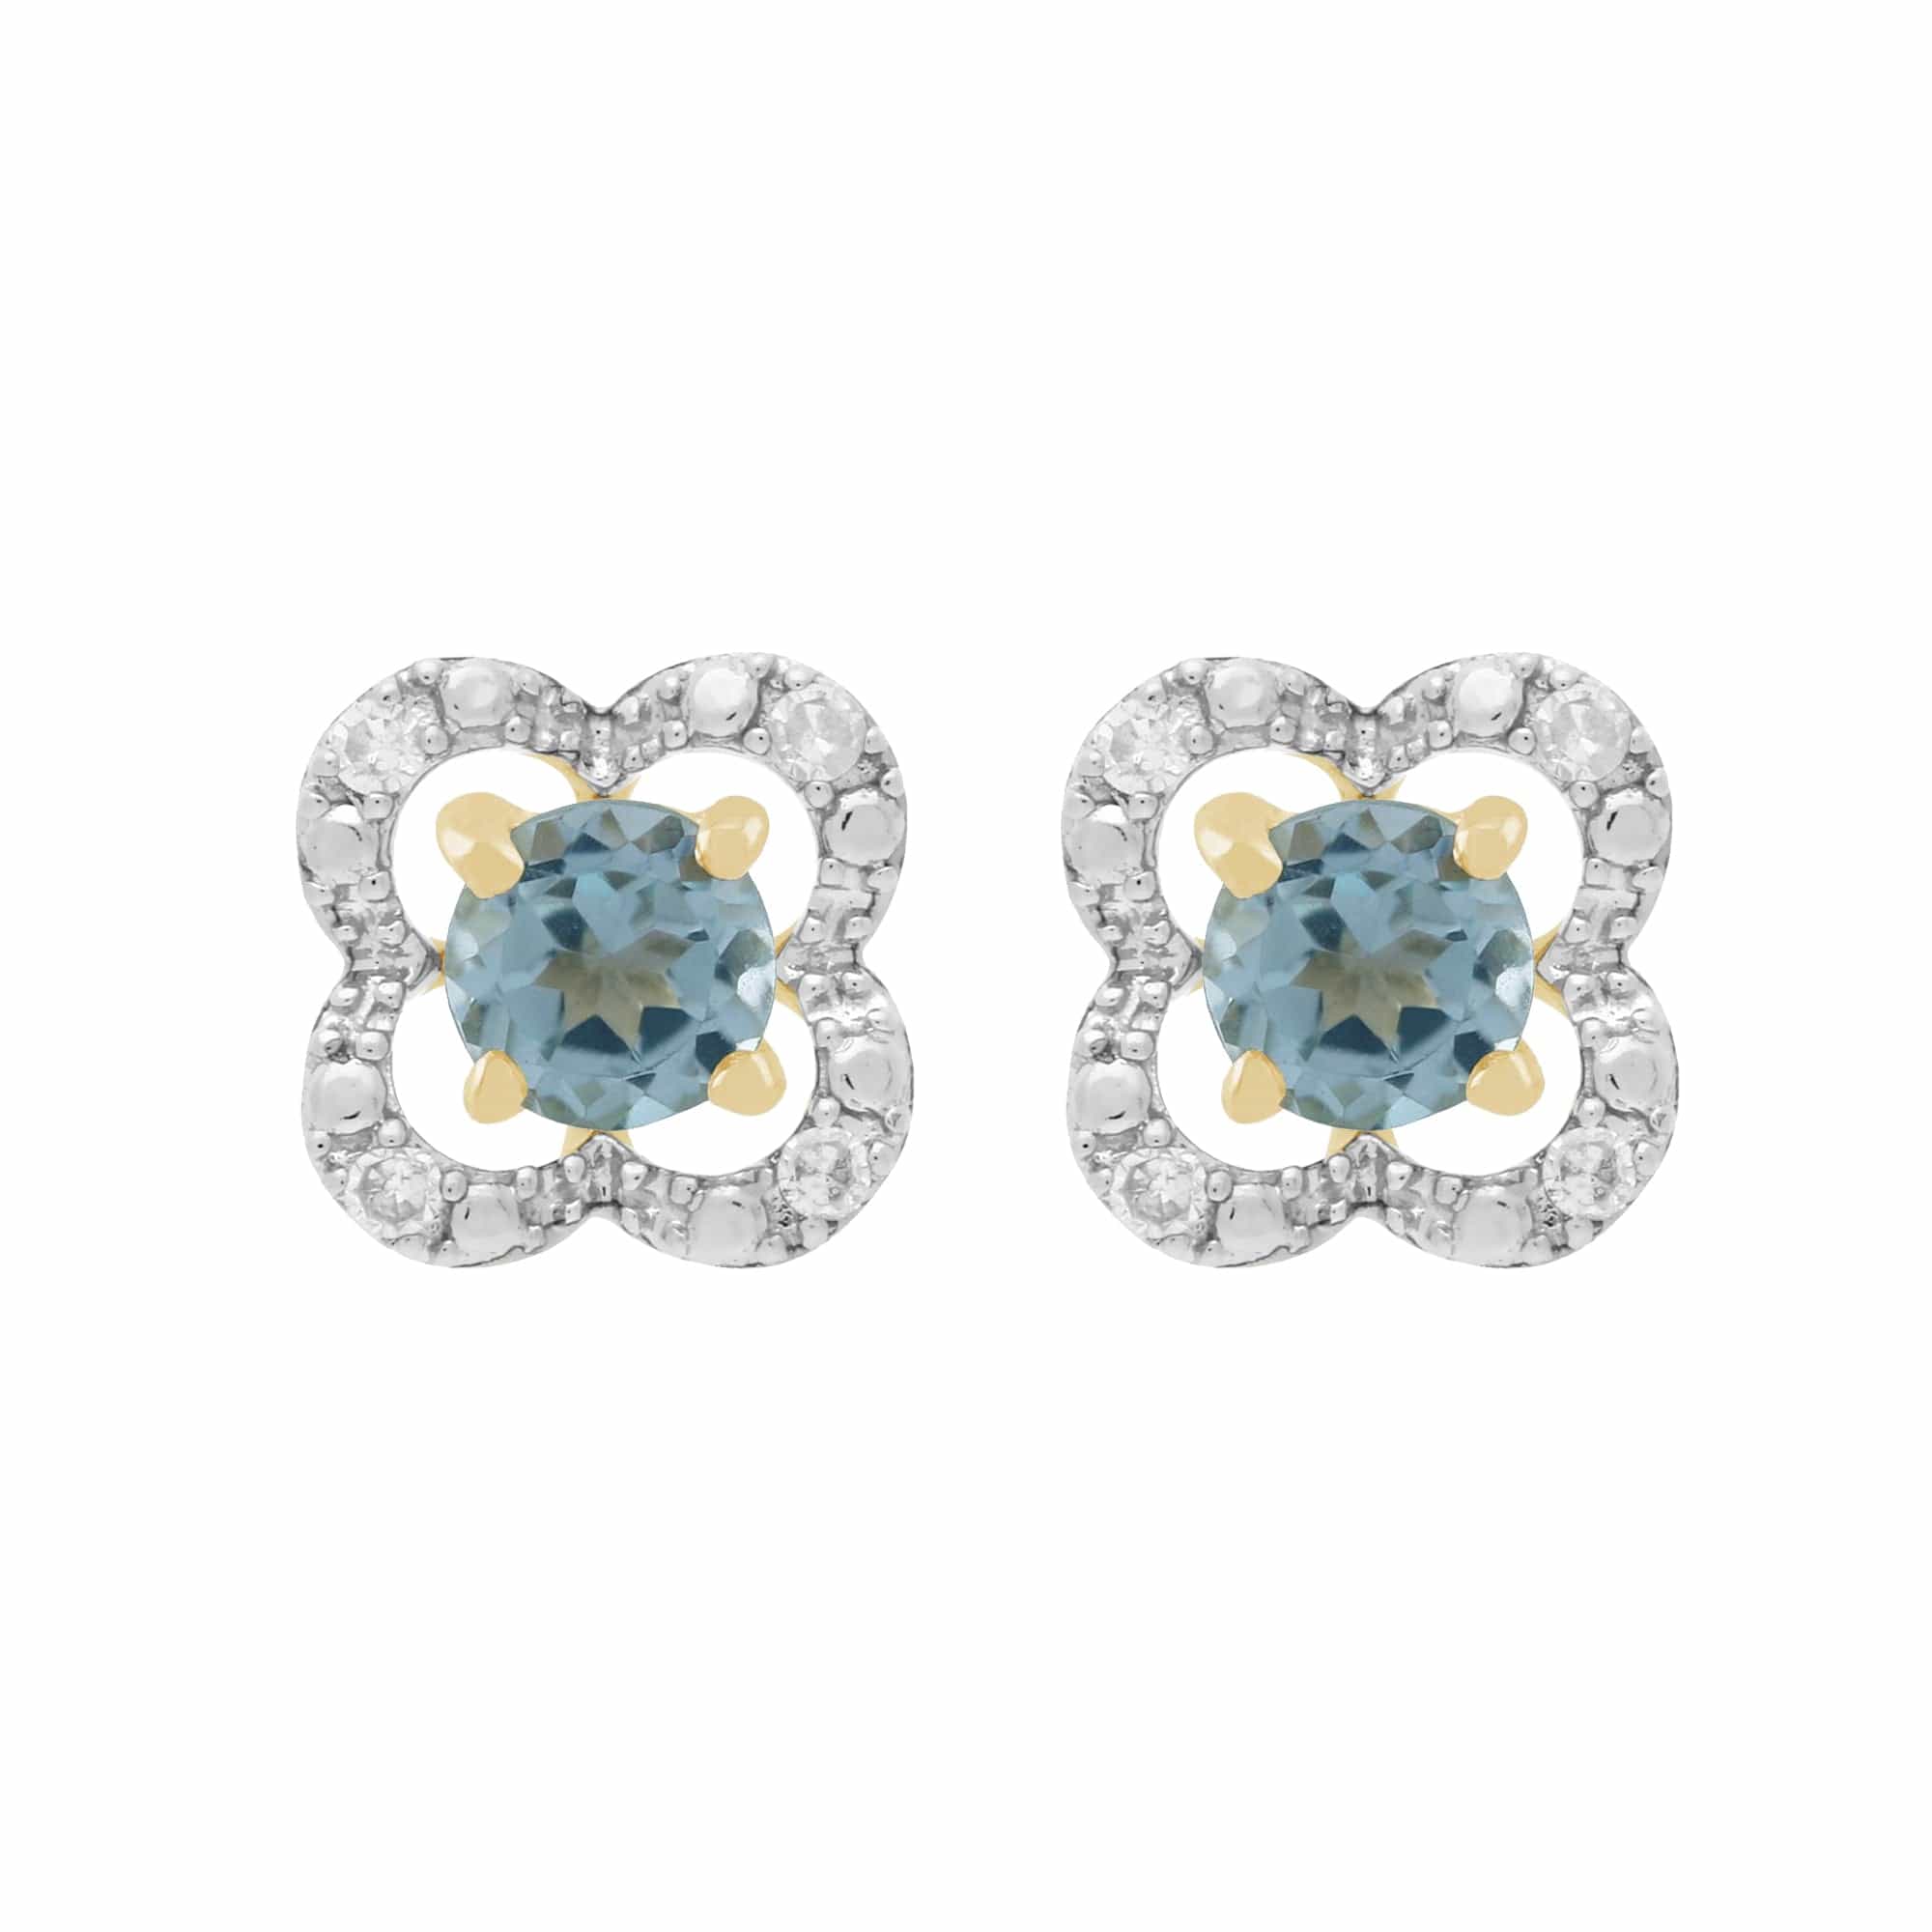 11555-191E0375019 Classic Round Blue Topaz Stud Earrings with Detachable Diamond Floral Ear Jacket in 9ct Yellow Gold 1